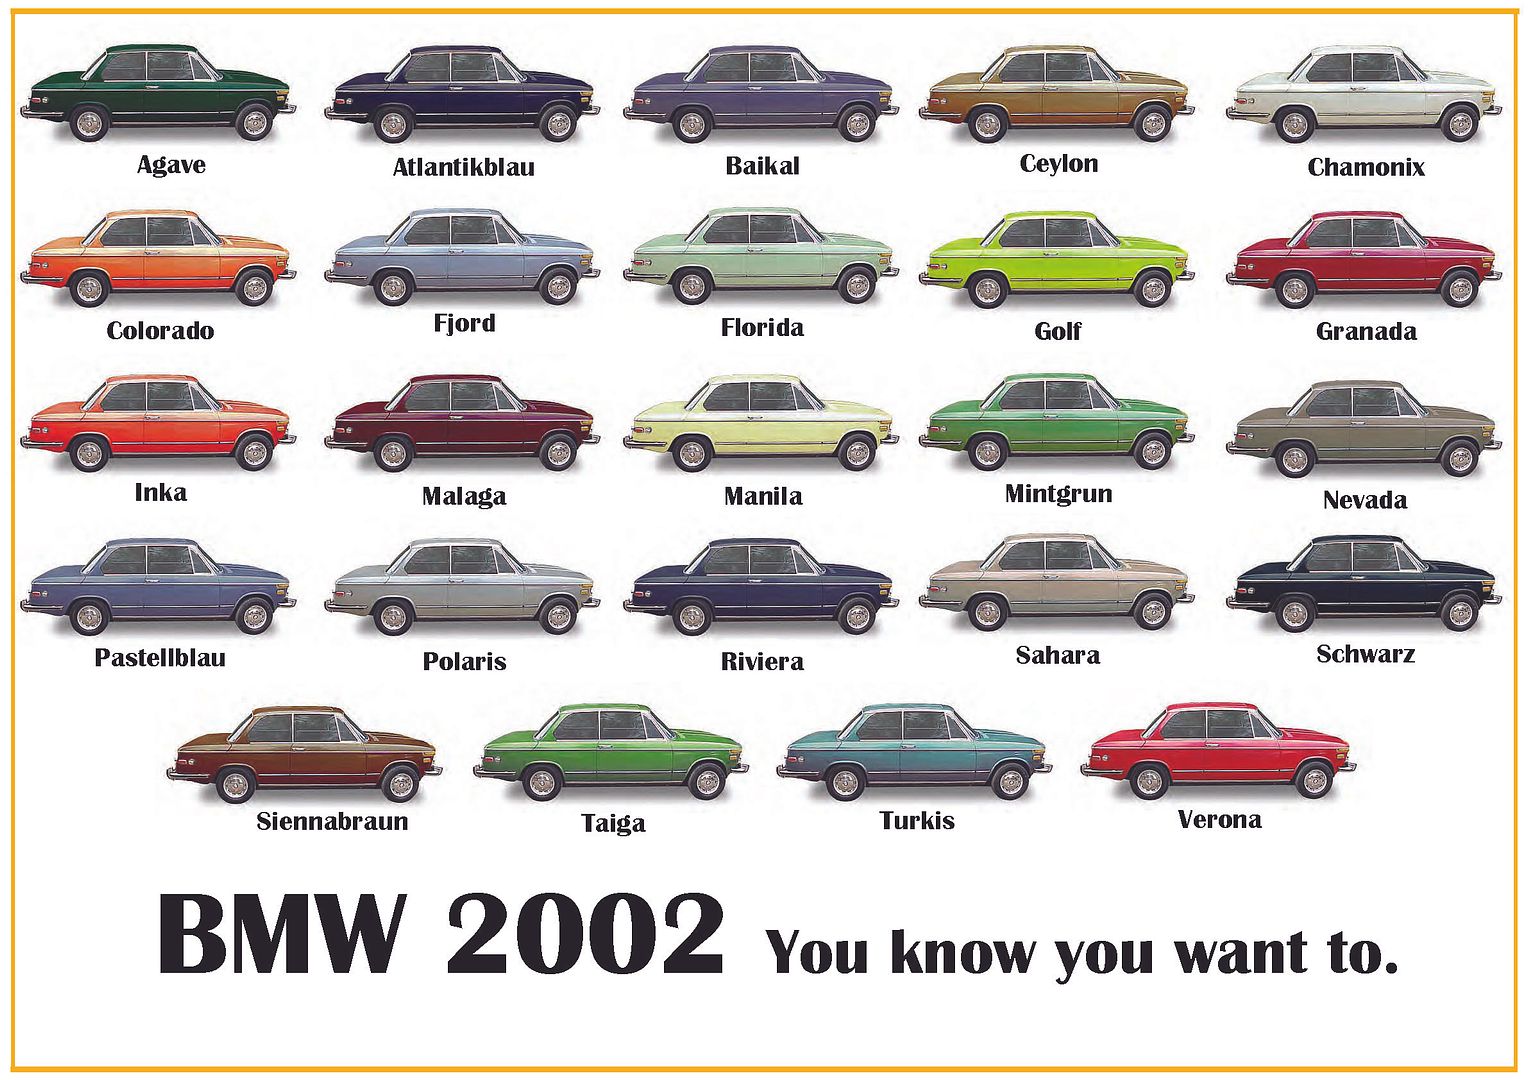 Bmw 2002 colors poster #5